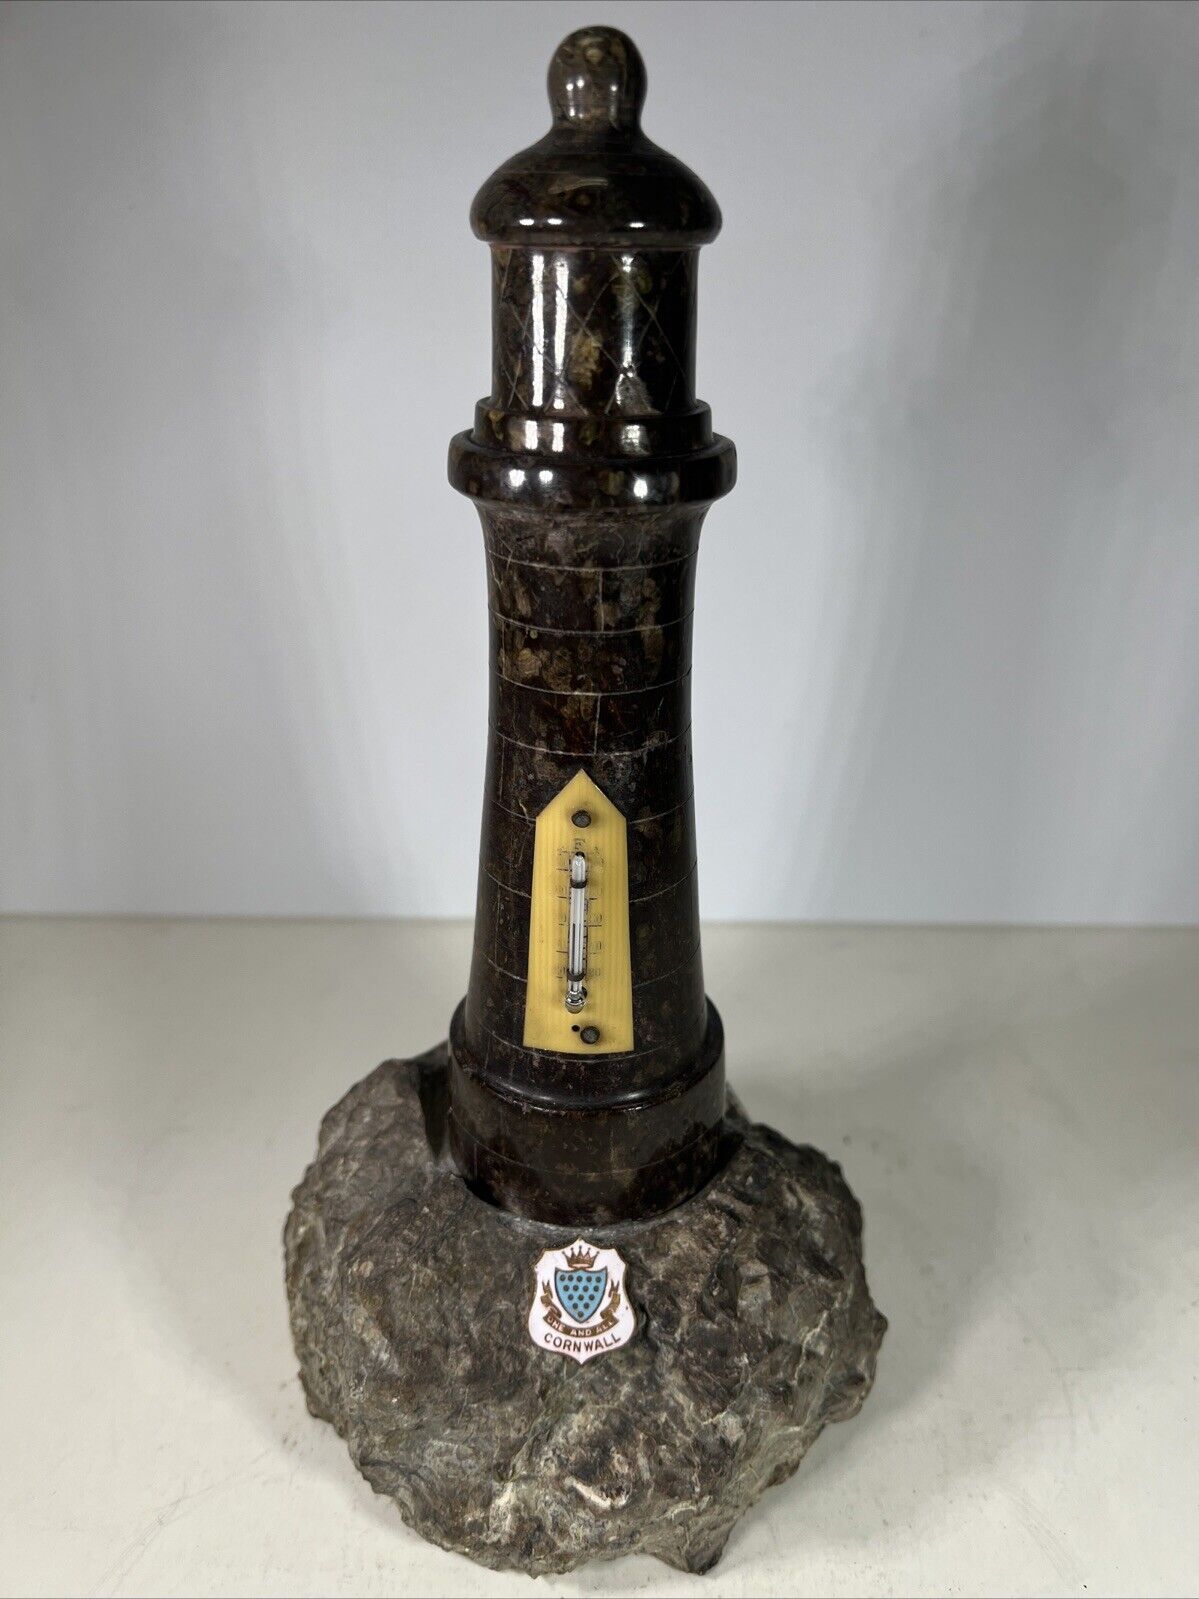 British Lighthouse Handmade Jasper With Thermometer Cornwall One And All Vintage